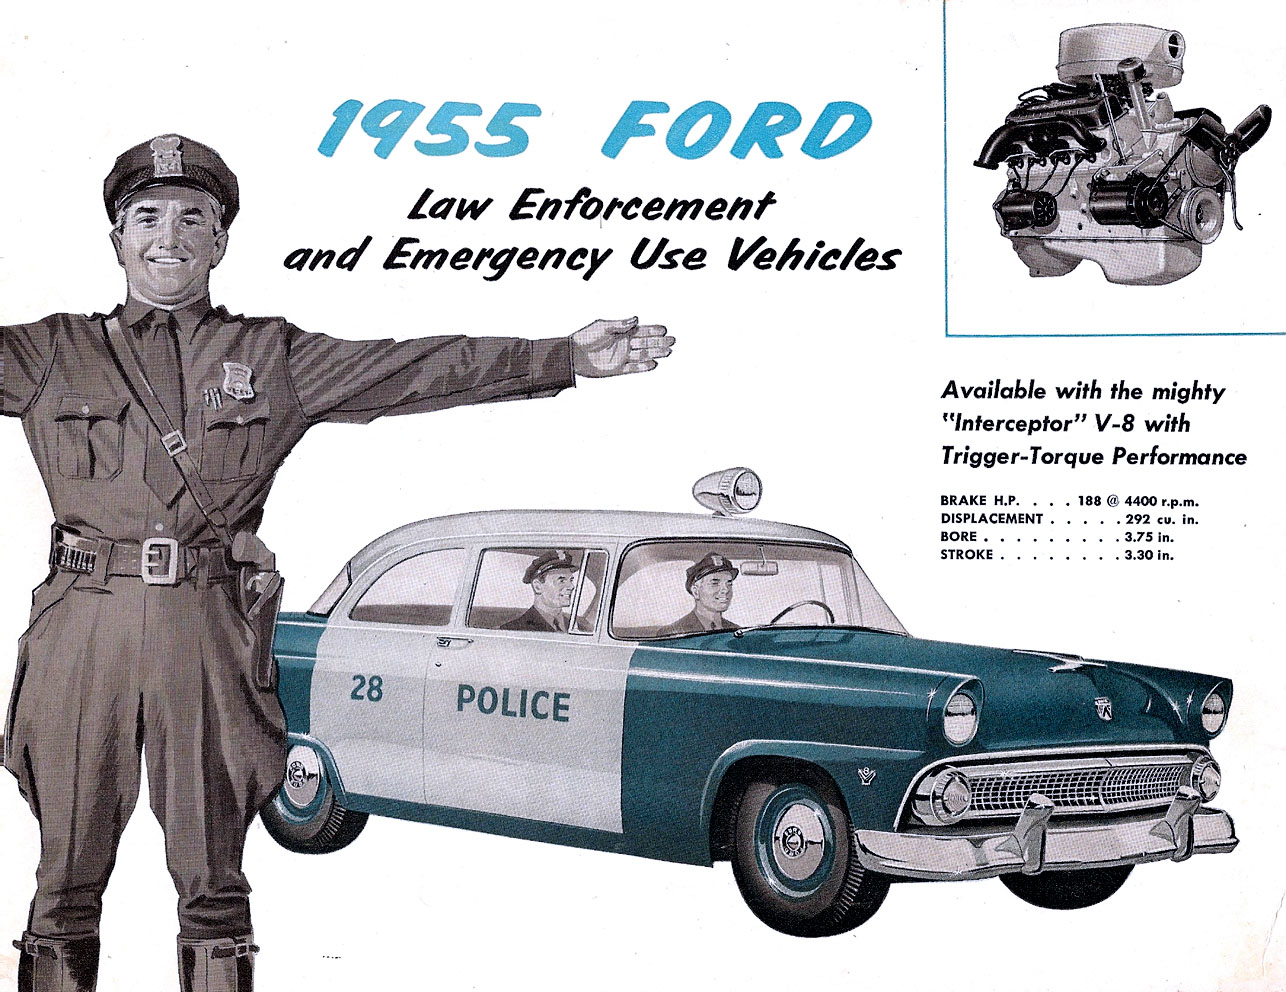 1955_Ford_Emergency_Vehicles-01